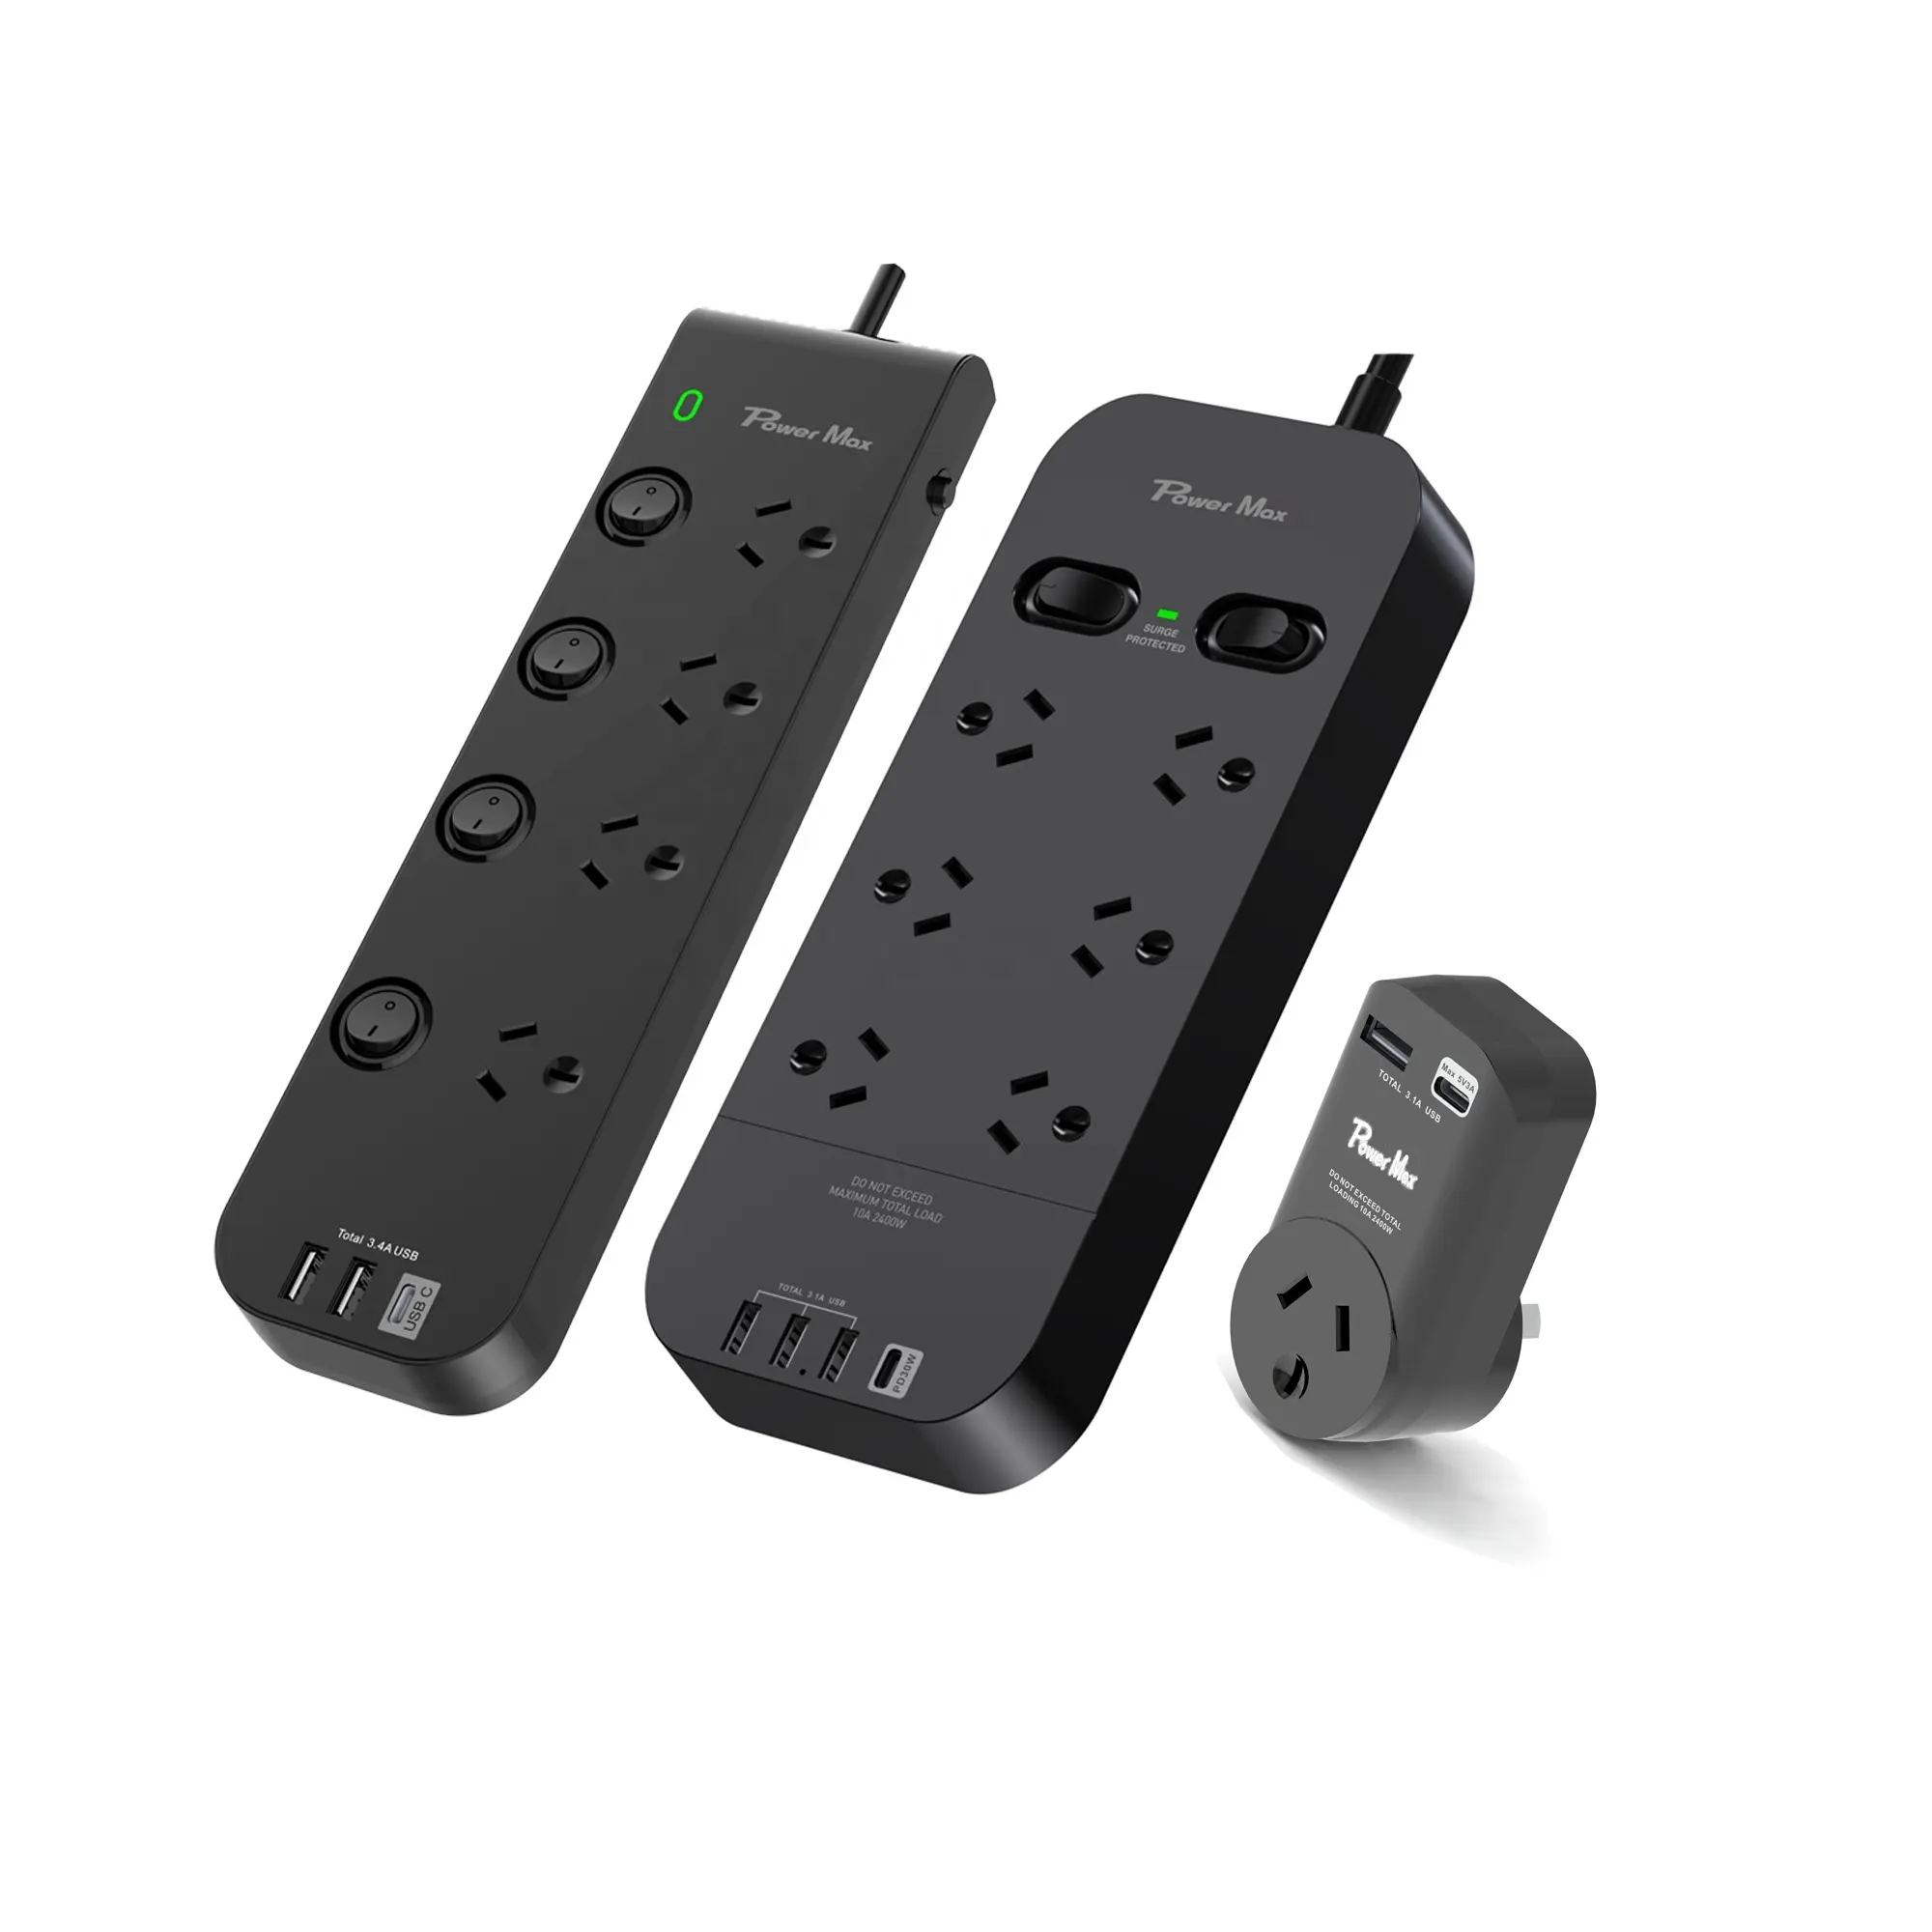 saa C-tick surge protector Australia 6 way power board with 4 USB ports,ODM OEM electrical supplies